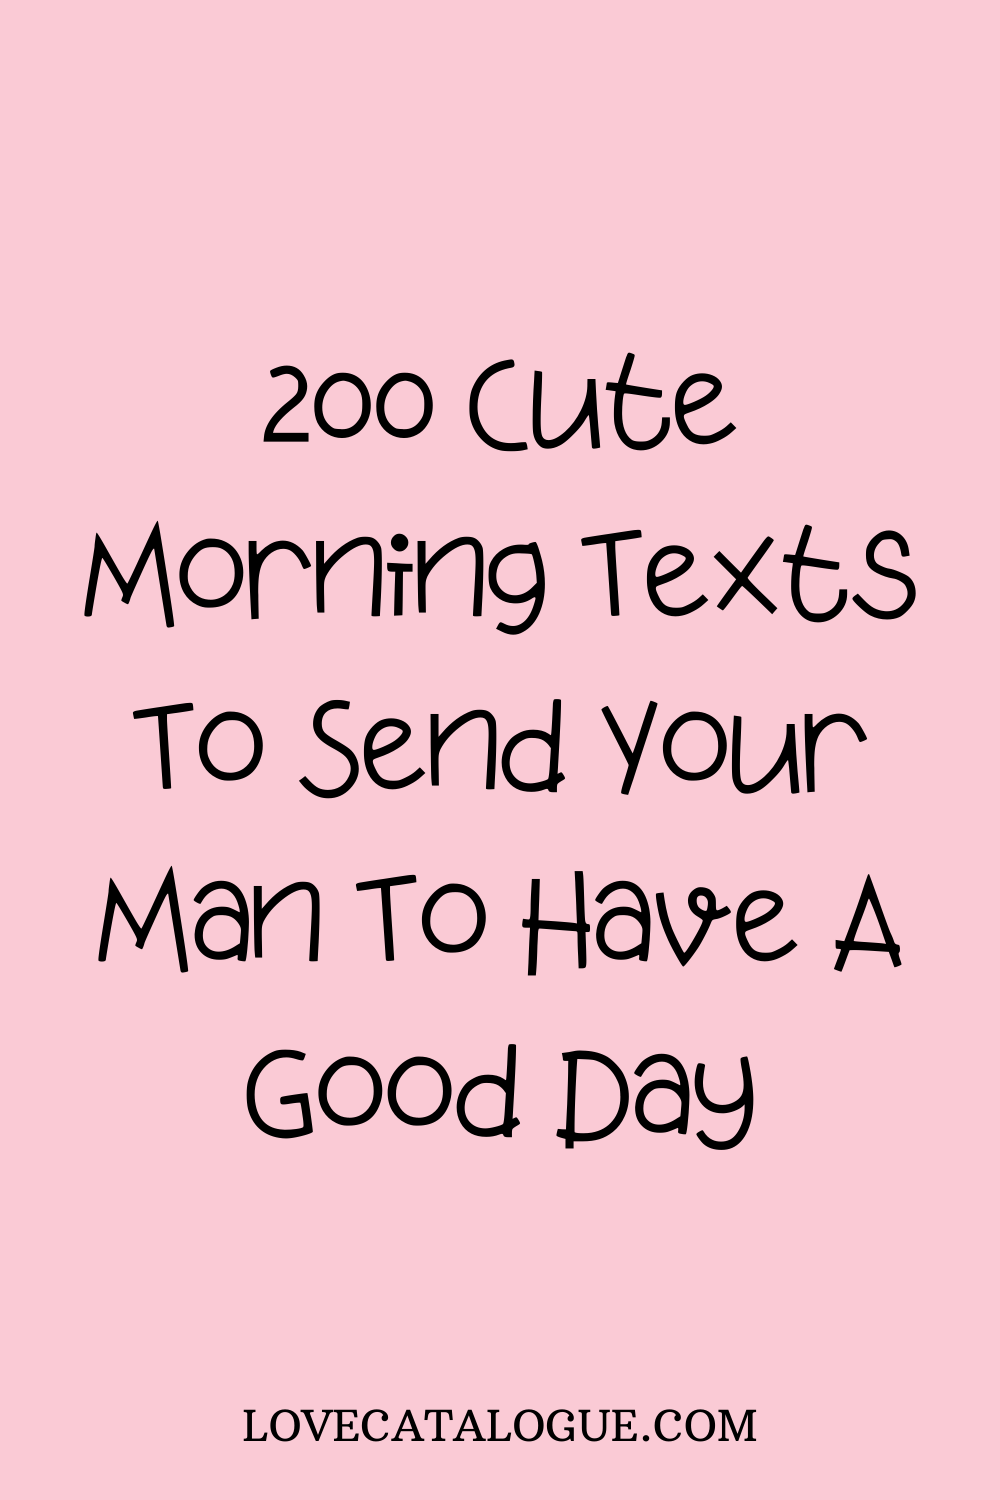 200 Cute morning texts to send your man to have a good day